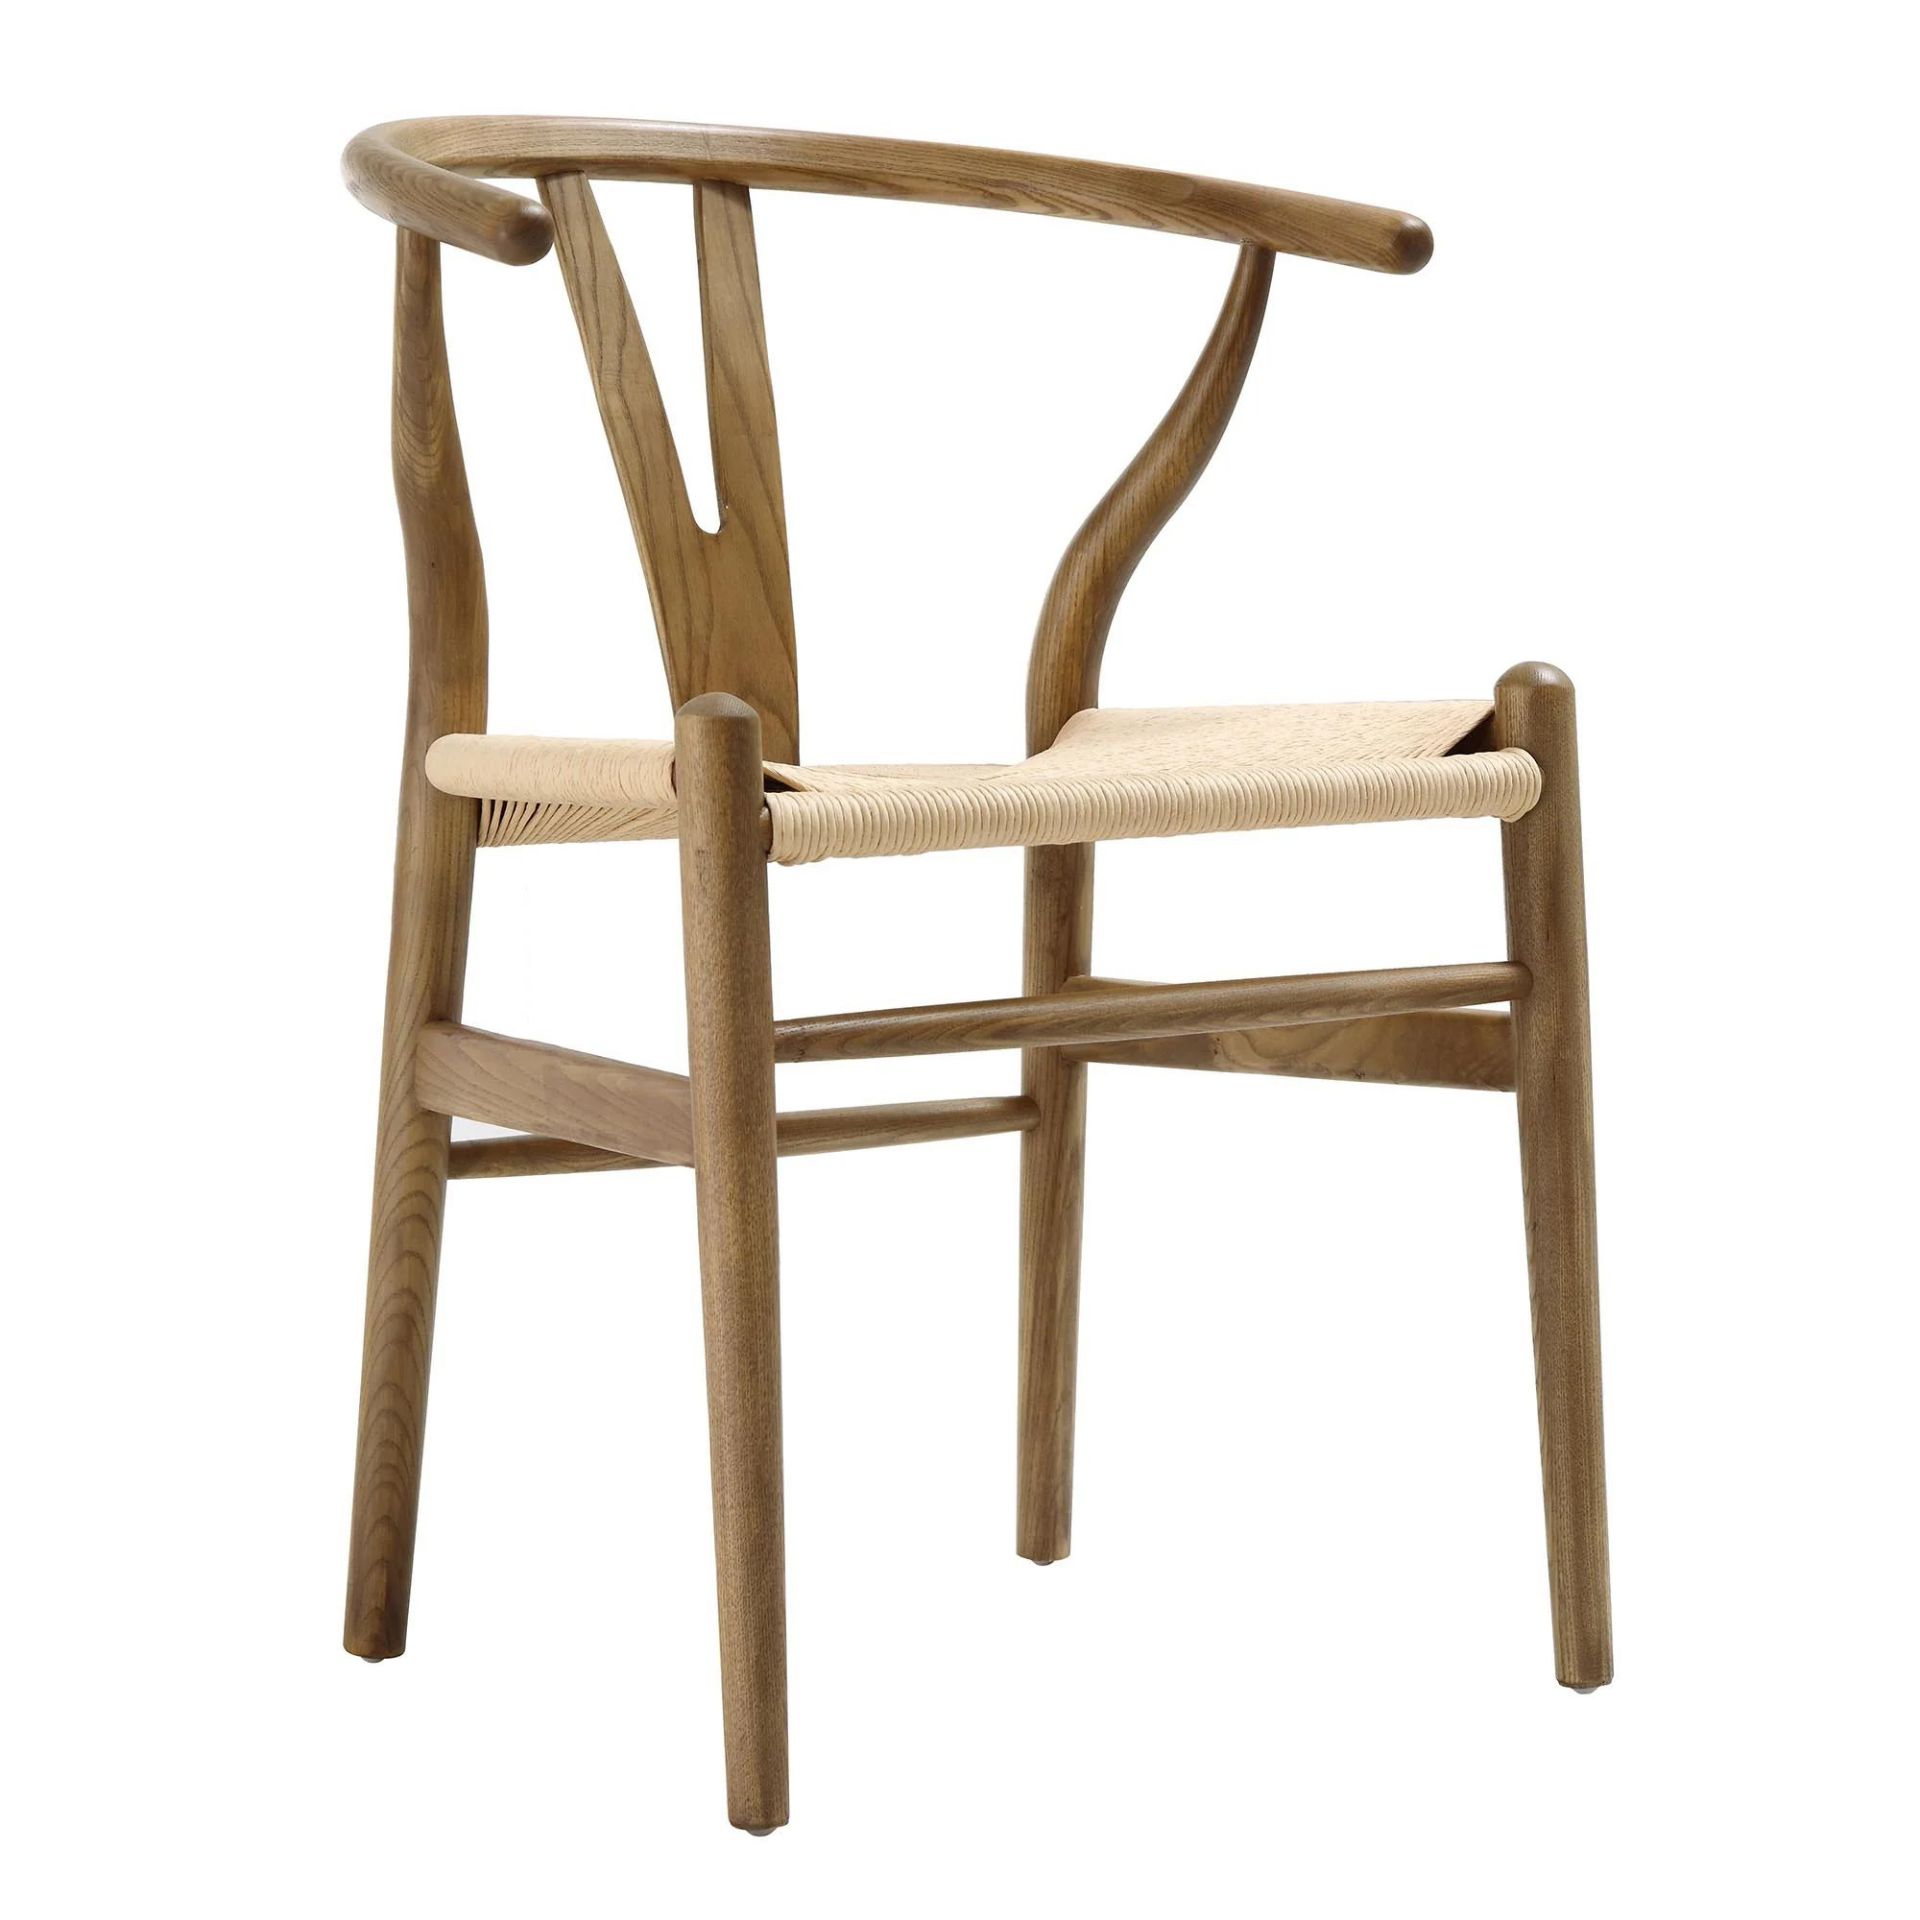 Hansel Wooden Natural Weave Wishbone Dining Chair, Light Walnut Colour Frame. - R19.6. RRP £189.